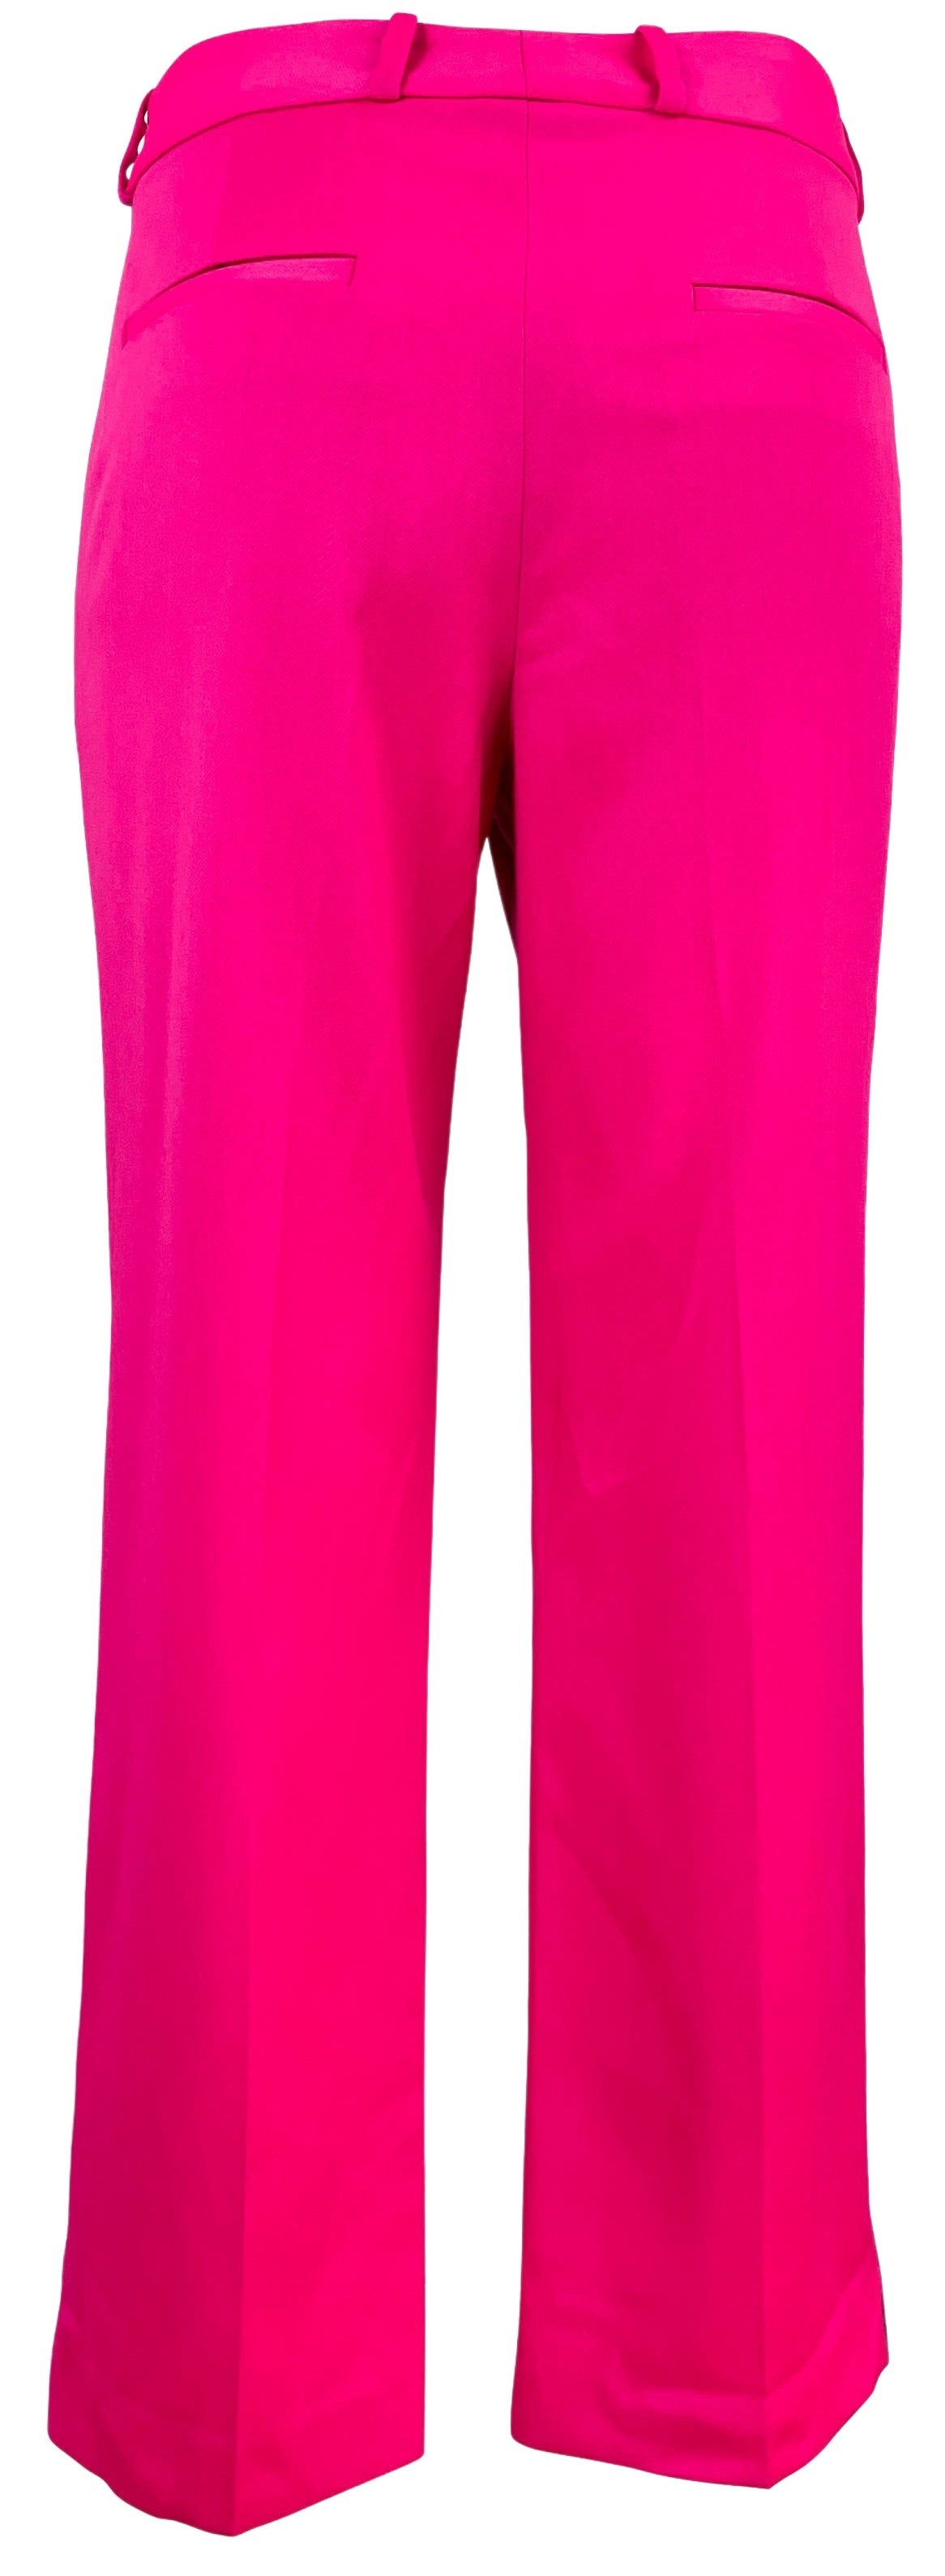 Brandon Maxwell Cropped Wool Trouser in Bright Pink - Discounts on Brandon Maxwell at UAL